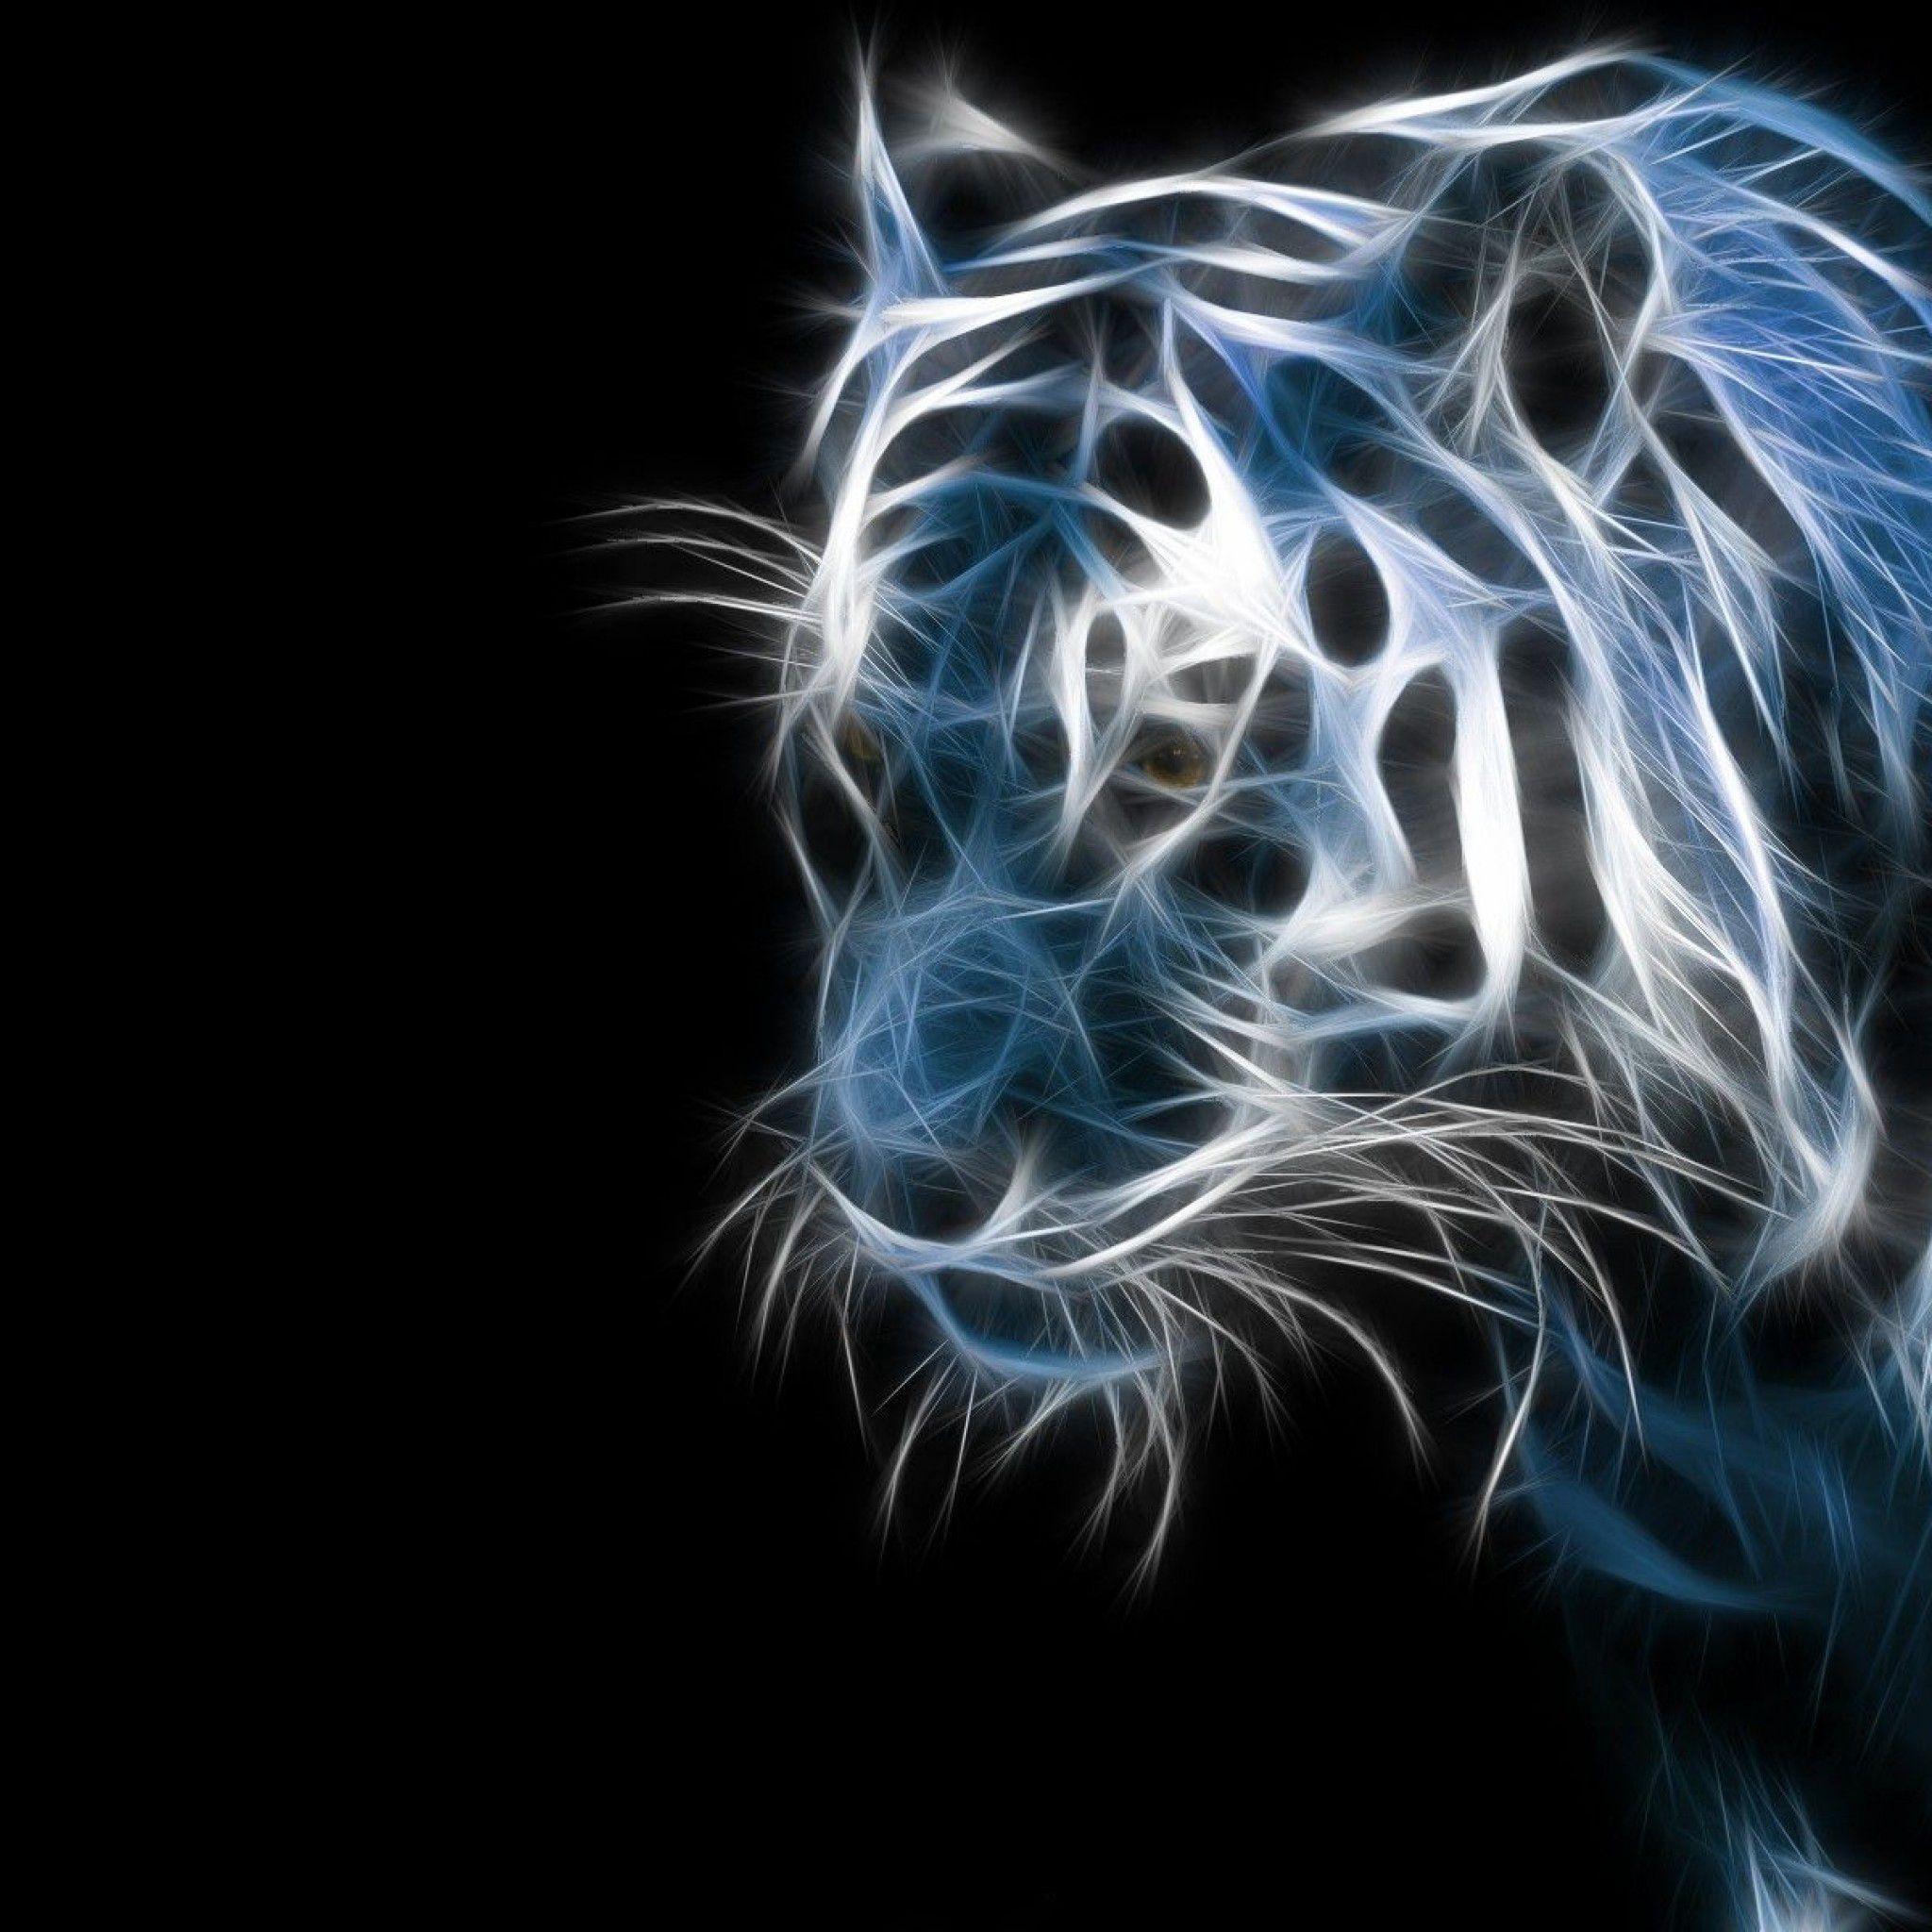 Wallpaper.wiki Abstract Blue Apple Background Cool Tiger Fractal